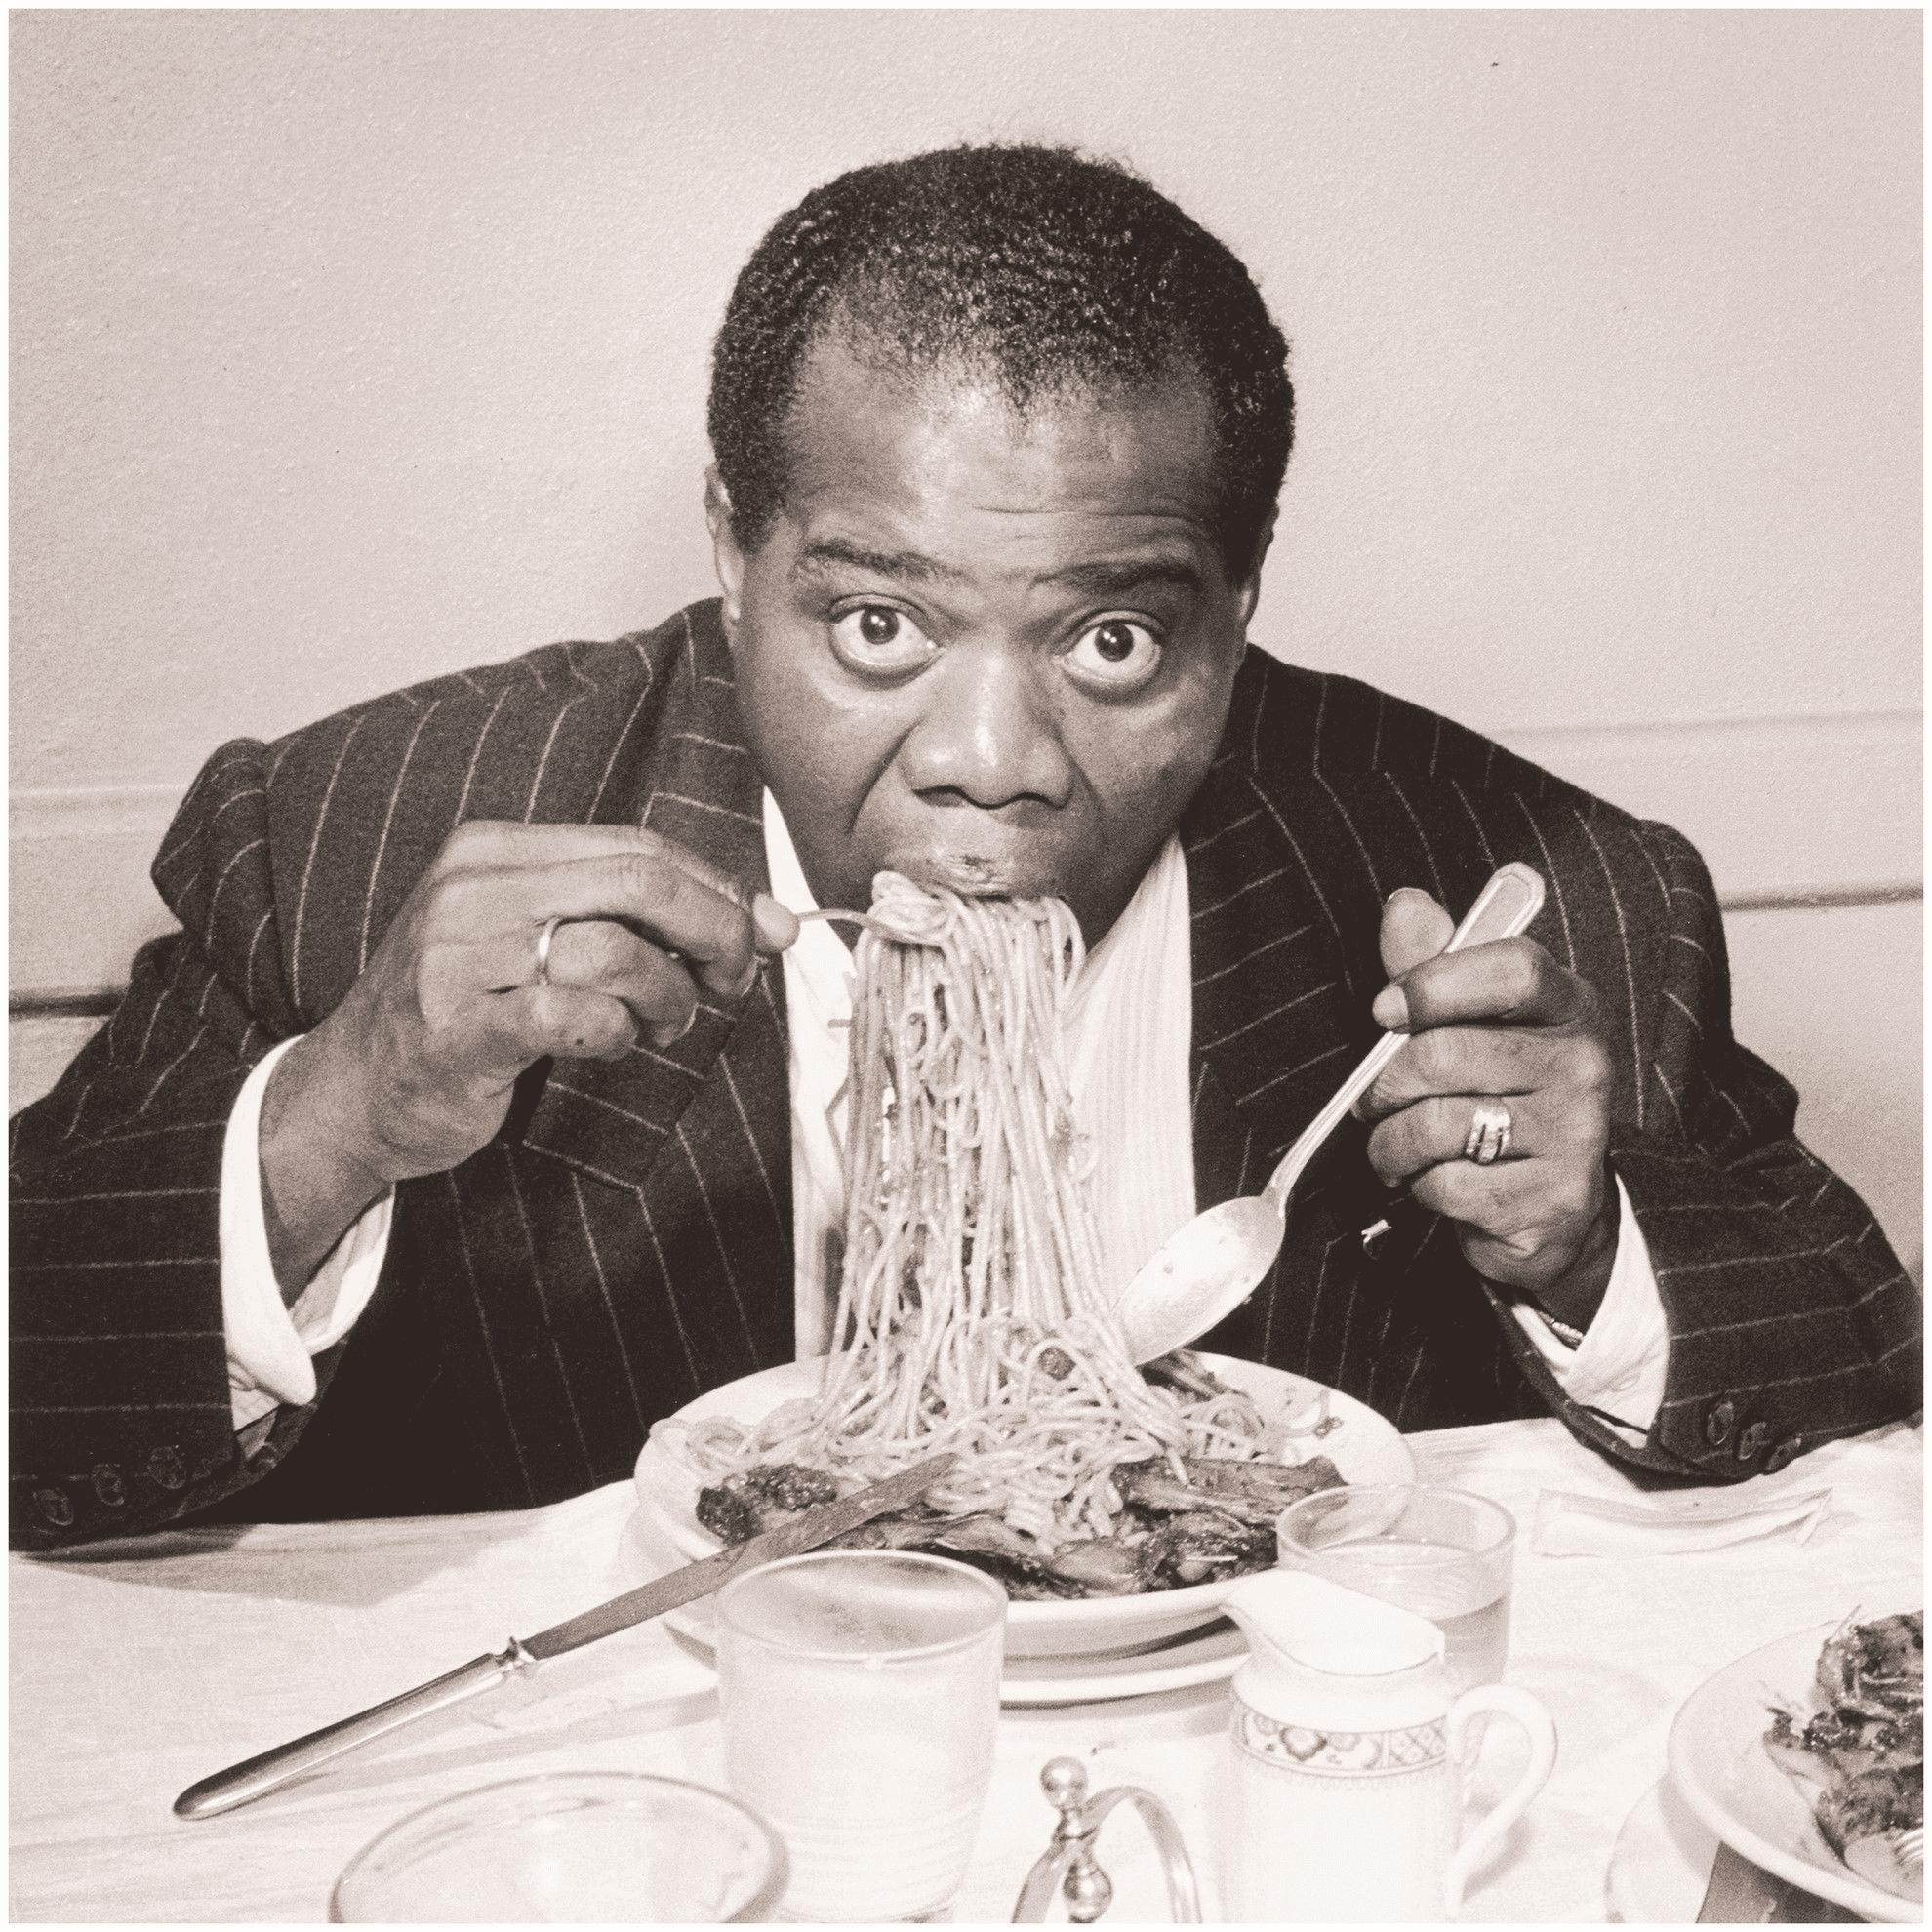 A black and white photograph of Louis Armstrong mid-bite with a large forkful of spaghetti